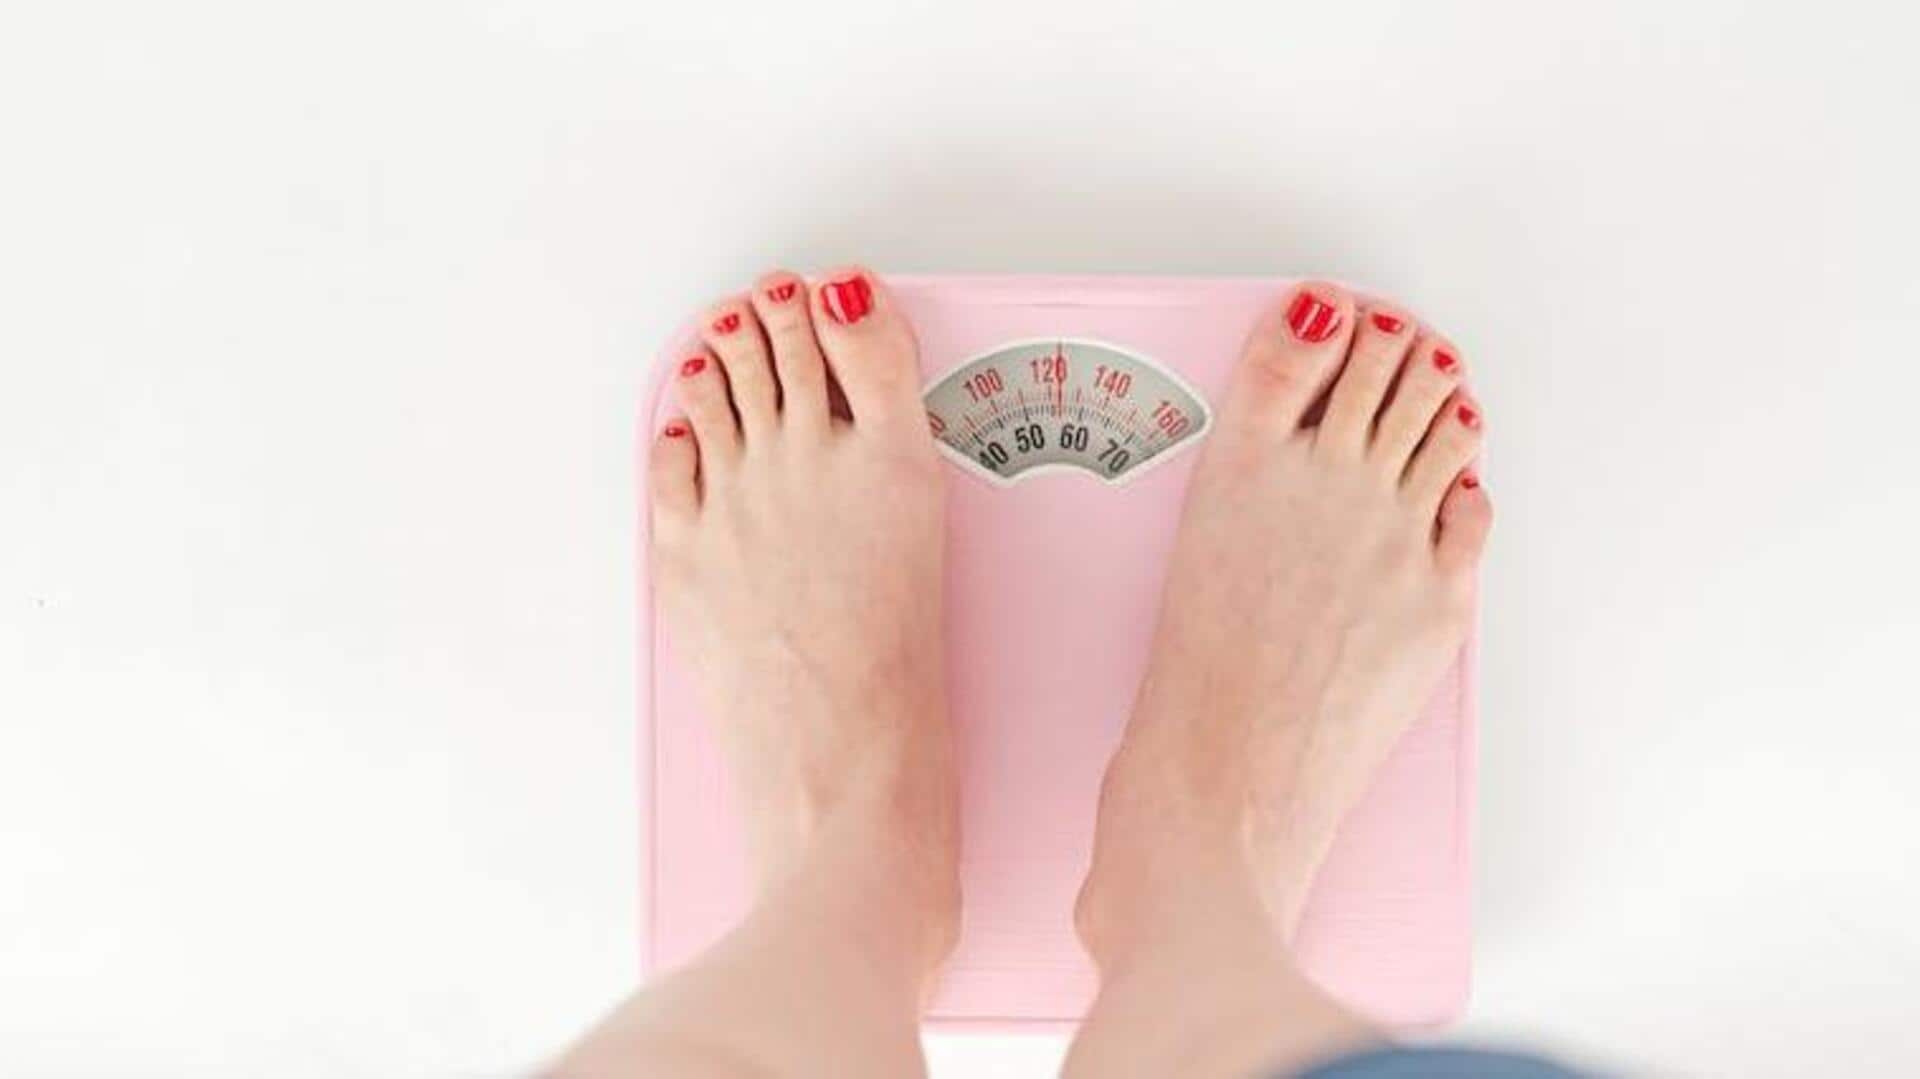 Factors contributing to post-surgery weight gain